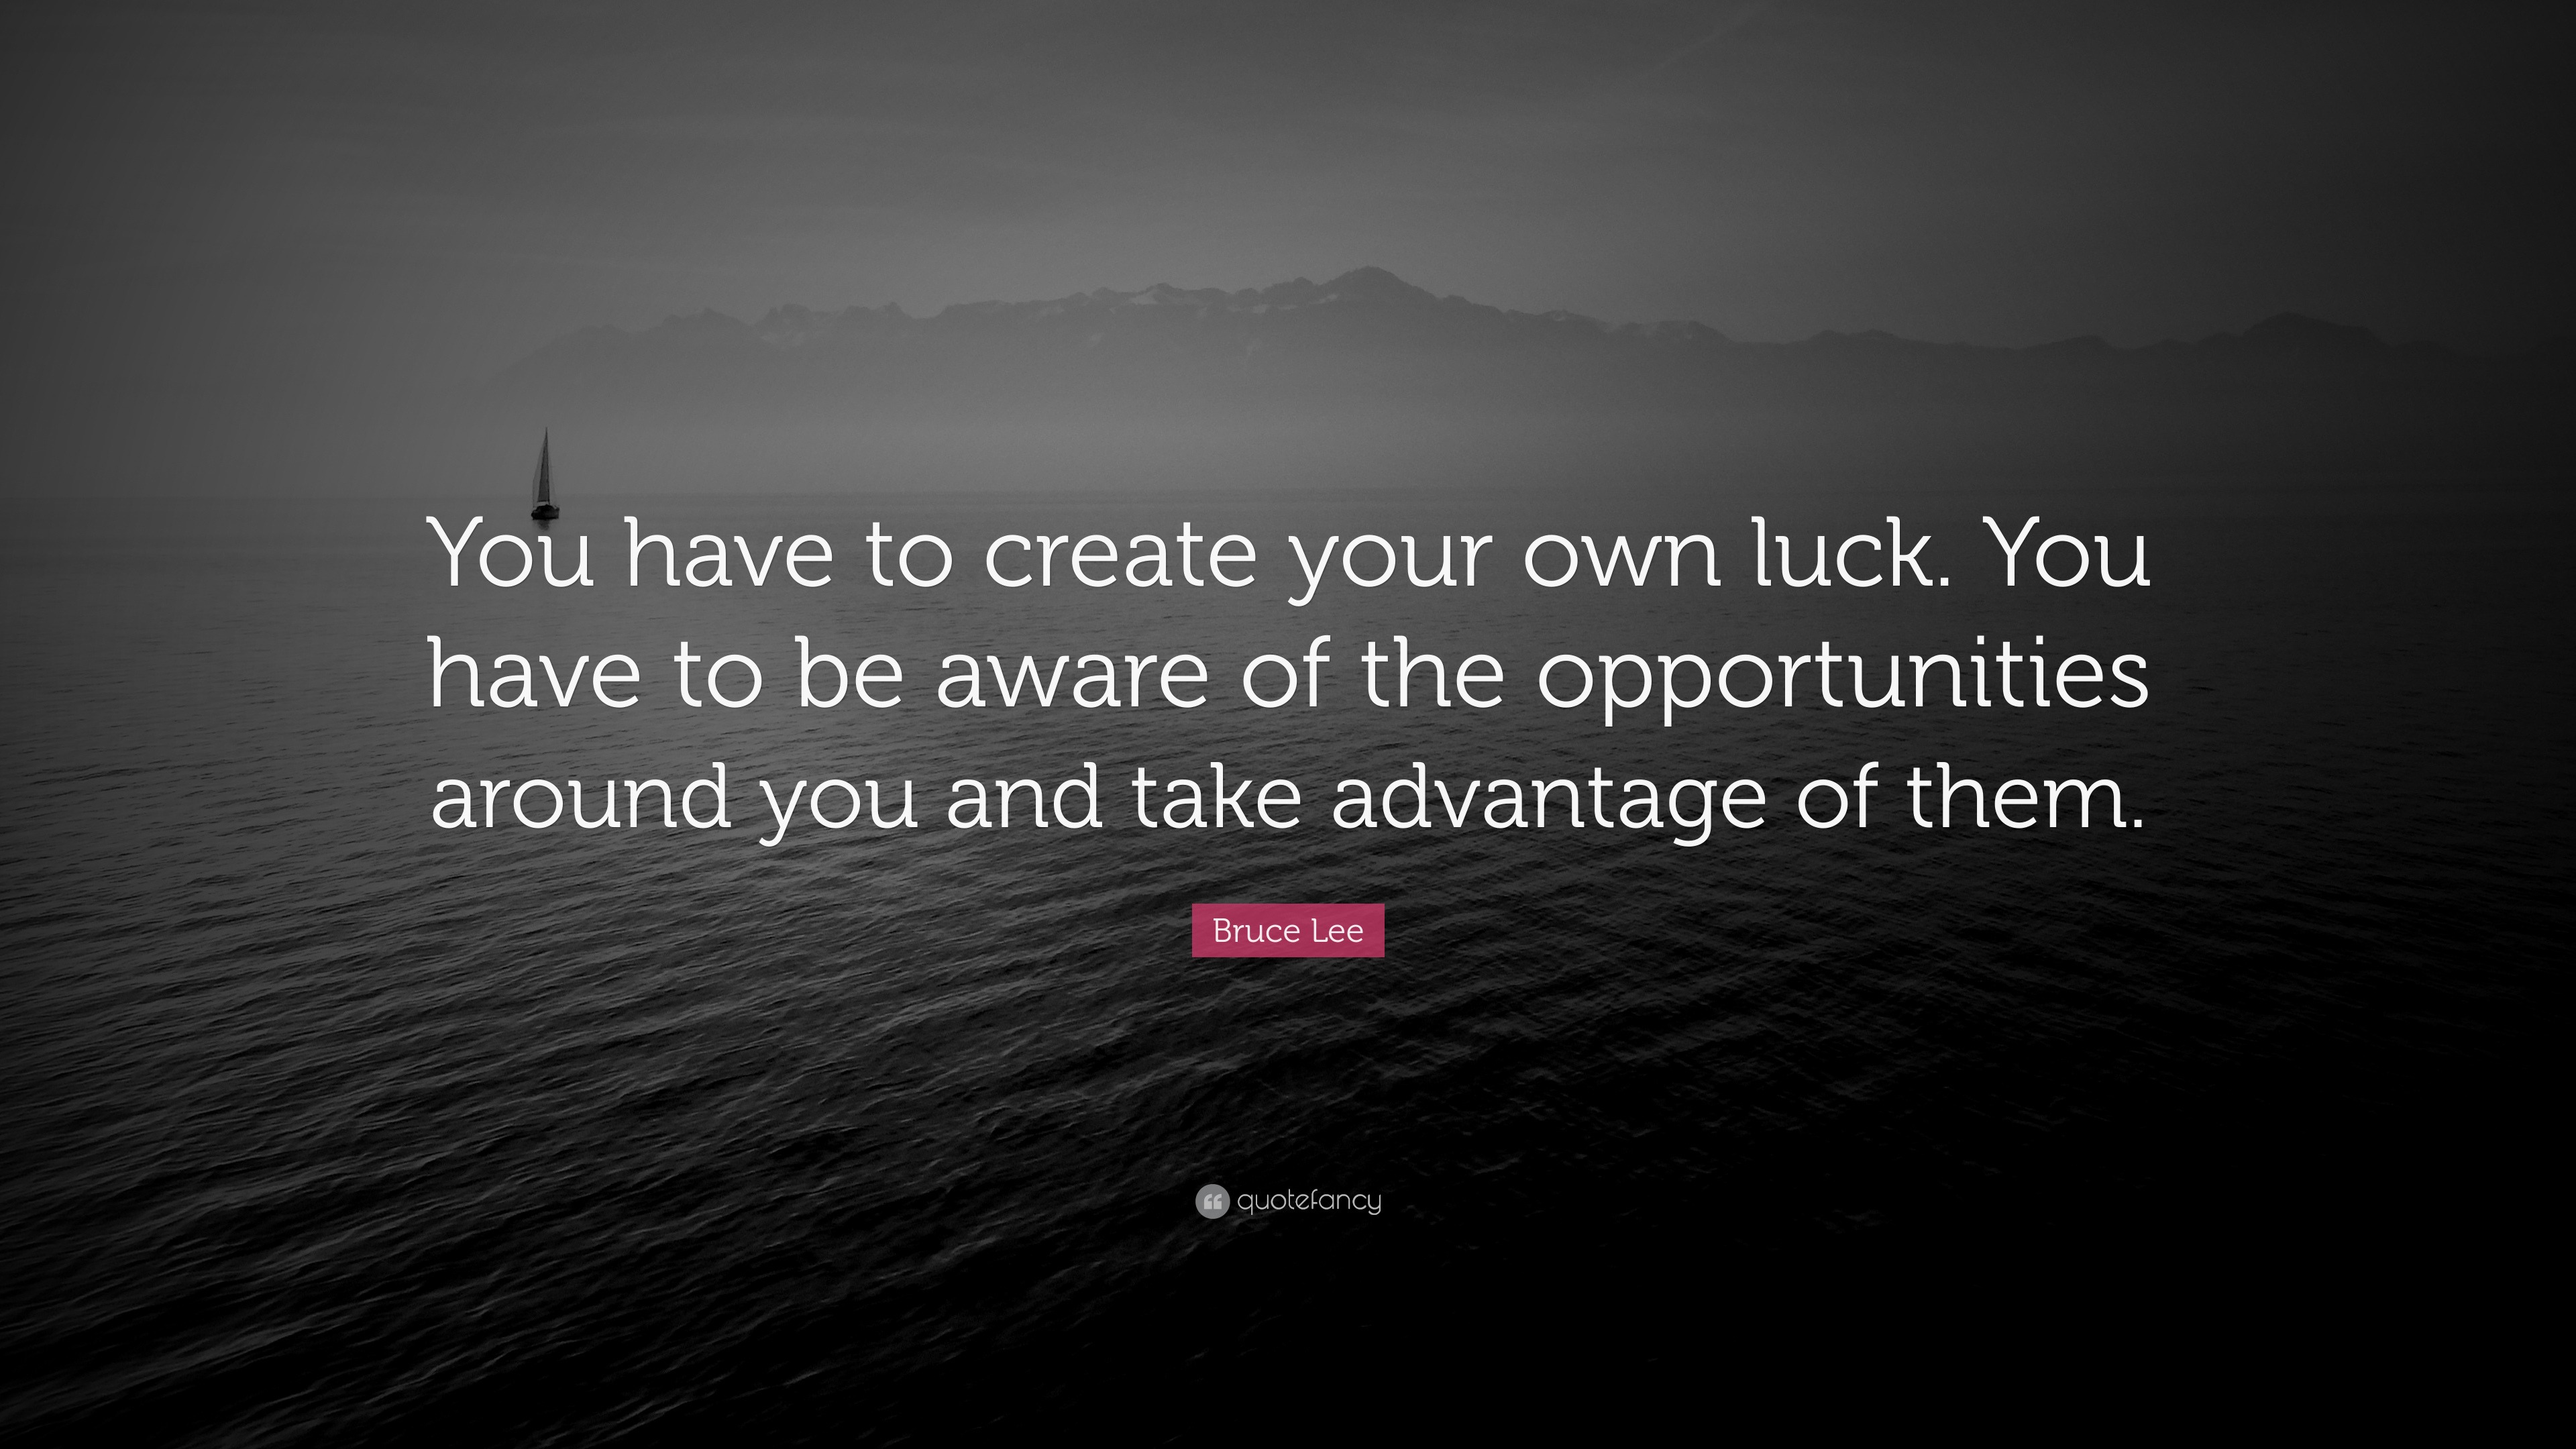 Bruce Lee Quote: “You have to create your own luck. You have to be aware of